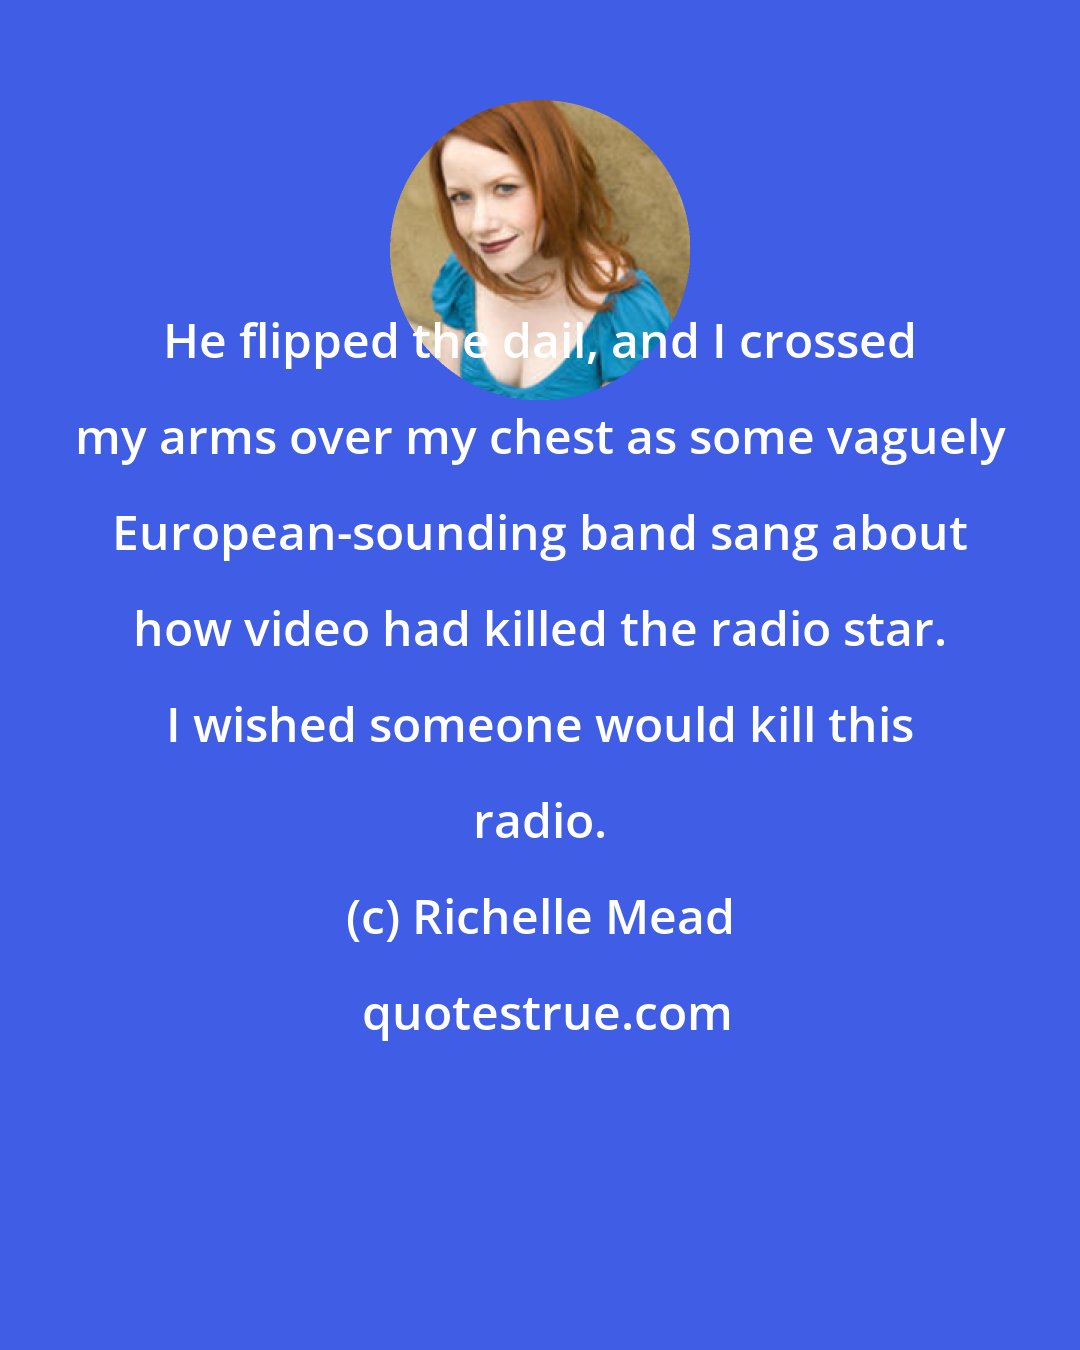 Richelle Mead: He flipped the dail, and I crossed my arms over my chest as some vaguely European-sounding band sang about how video had killed the radio star. I wished someone would kill this radio.